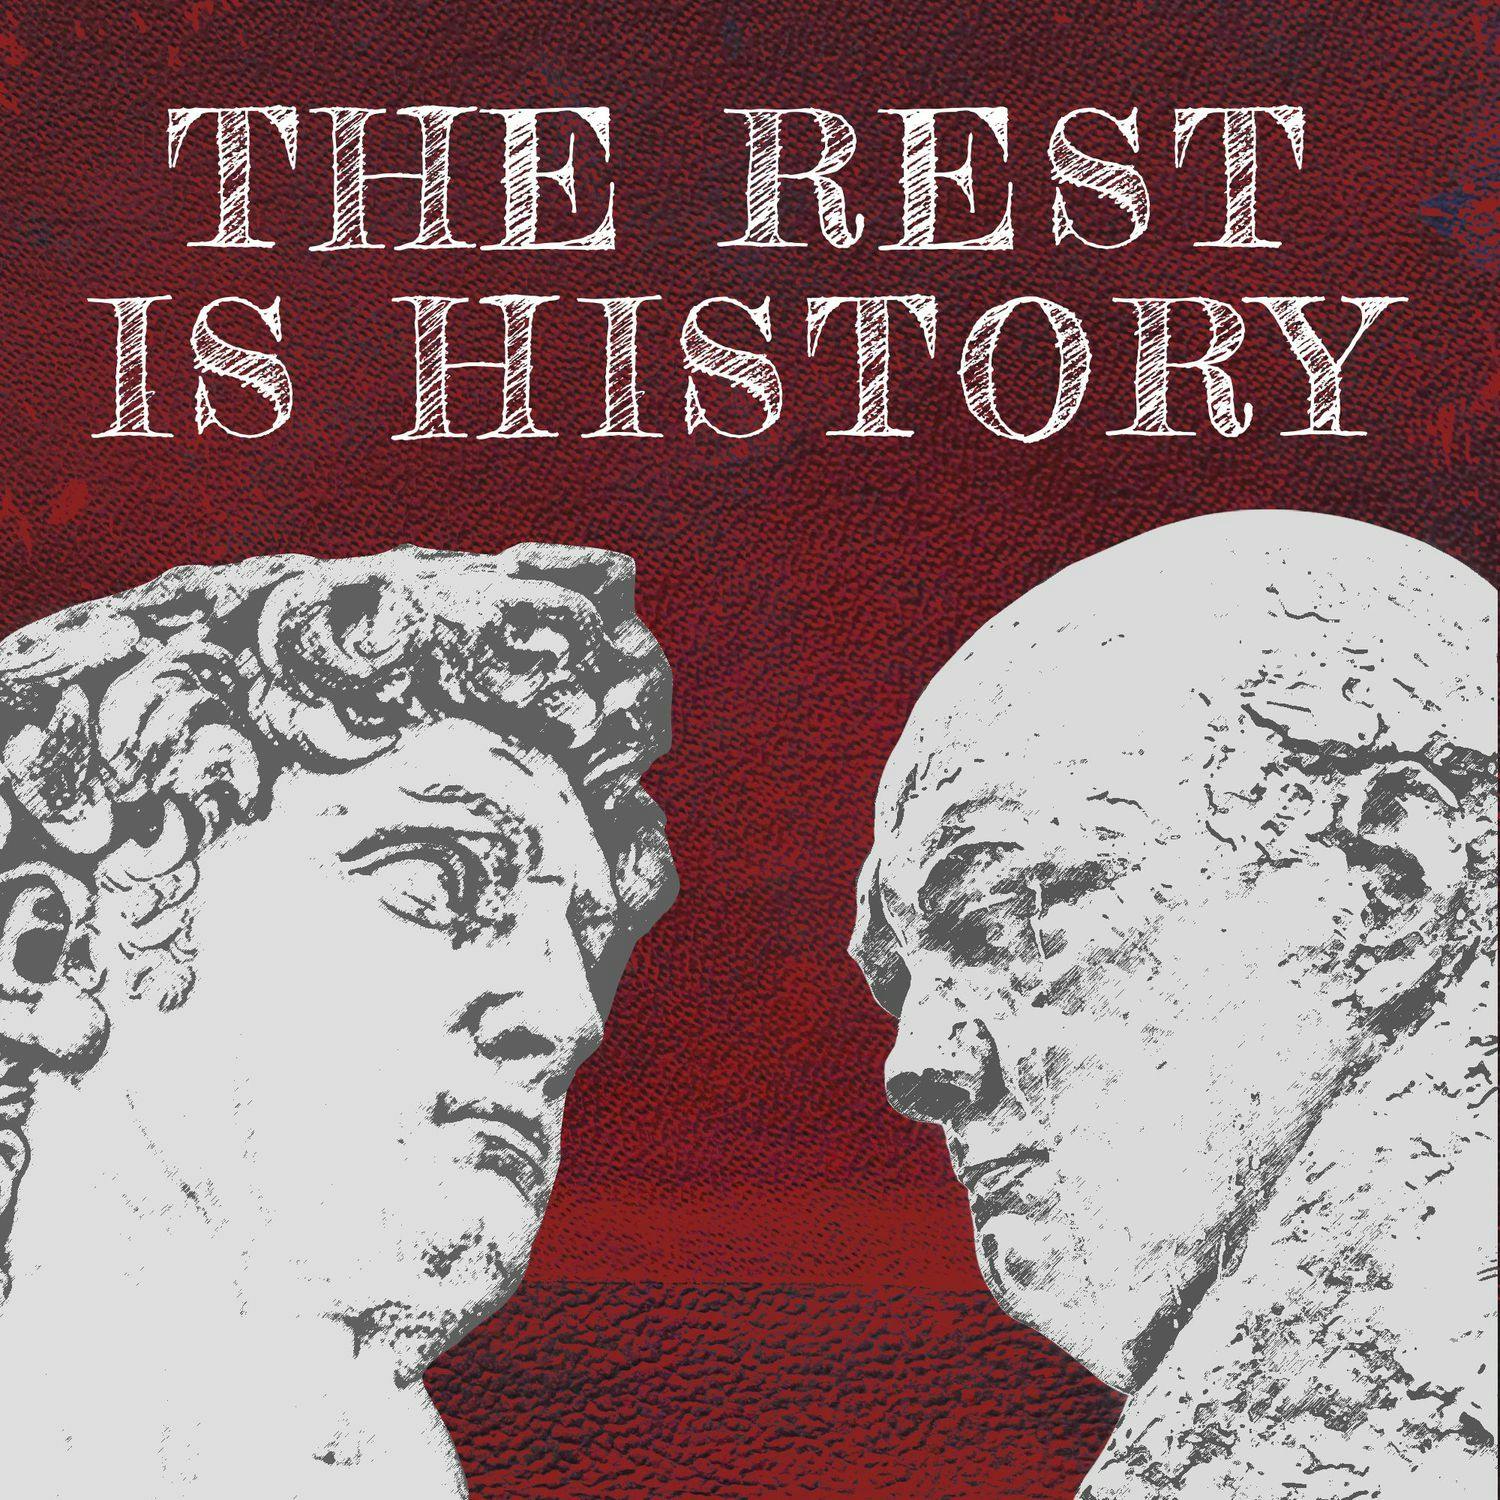 134. Crossing the Rubicon: The rise of Julius Caesar by Goalhanger Podcasts